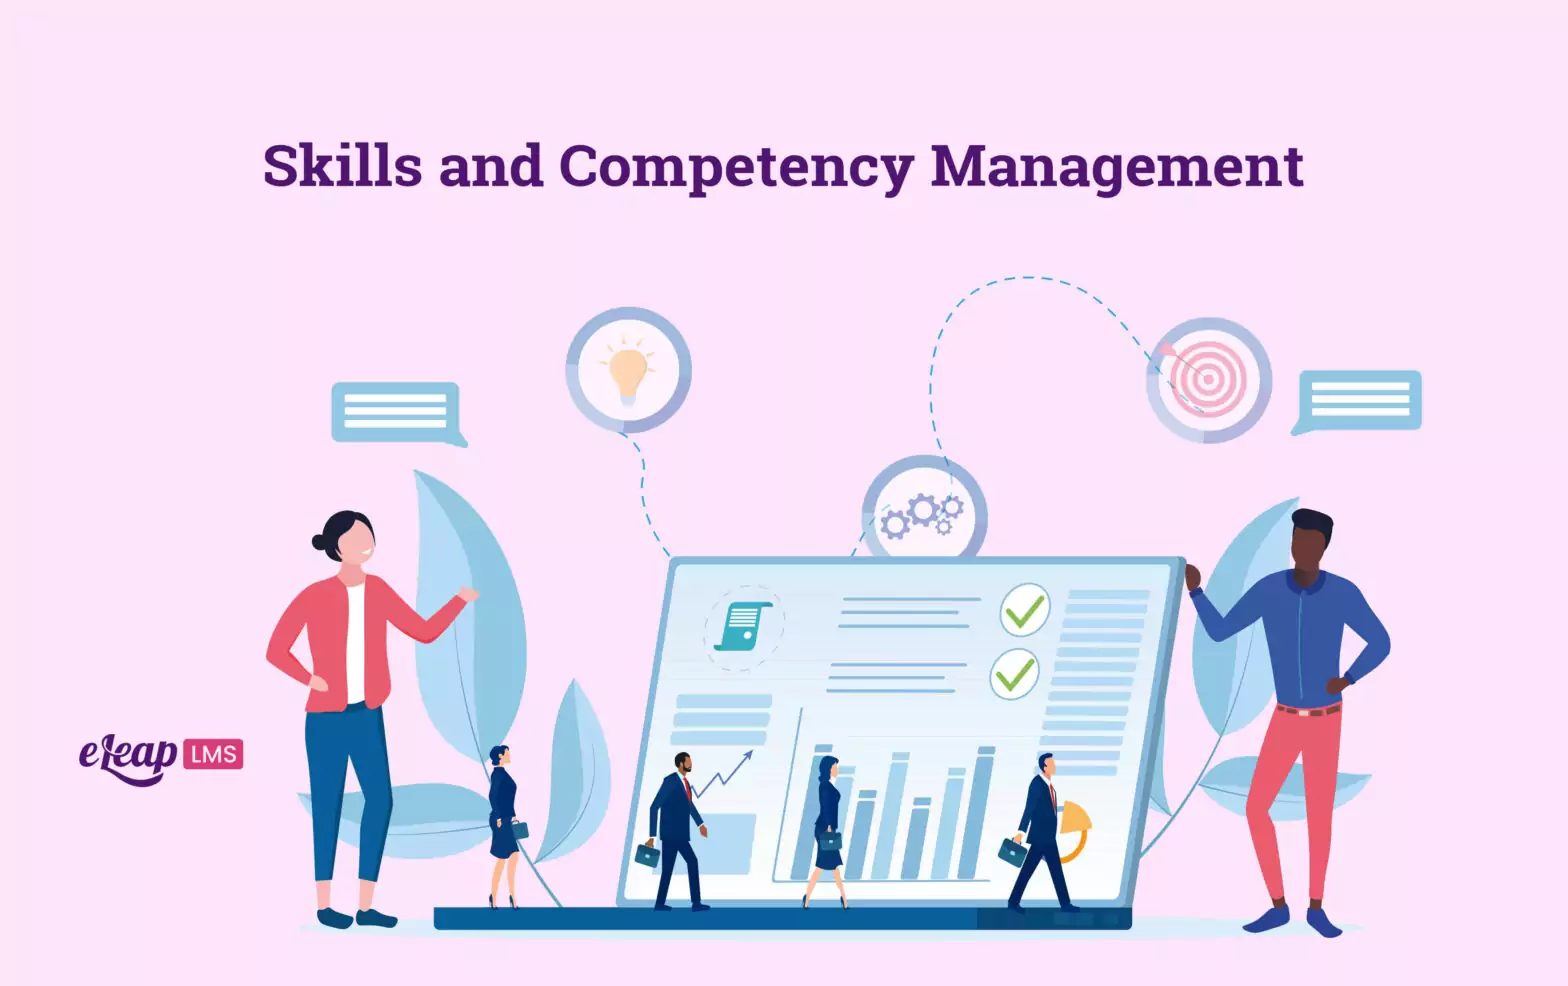 Skills and Competency Management with the eLeaP LMS